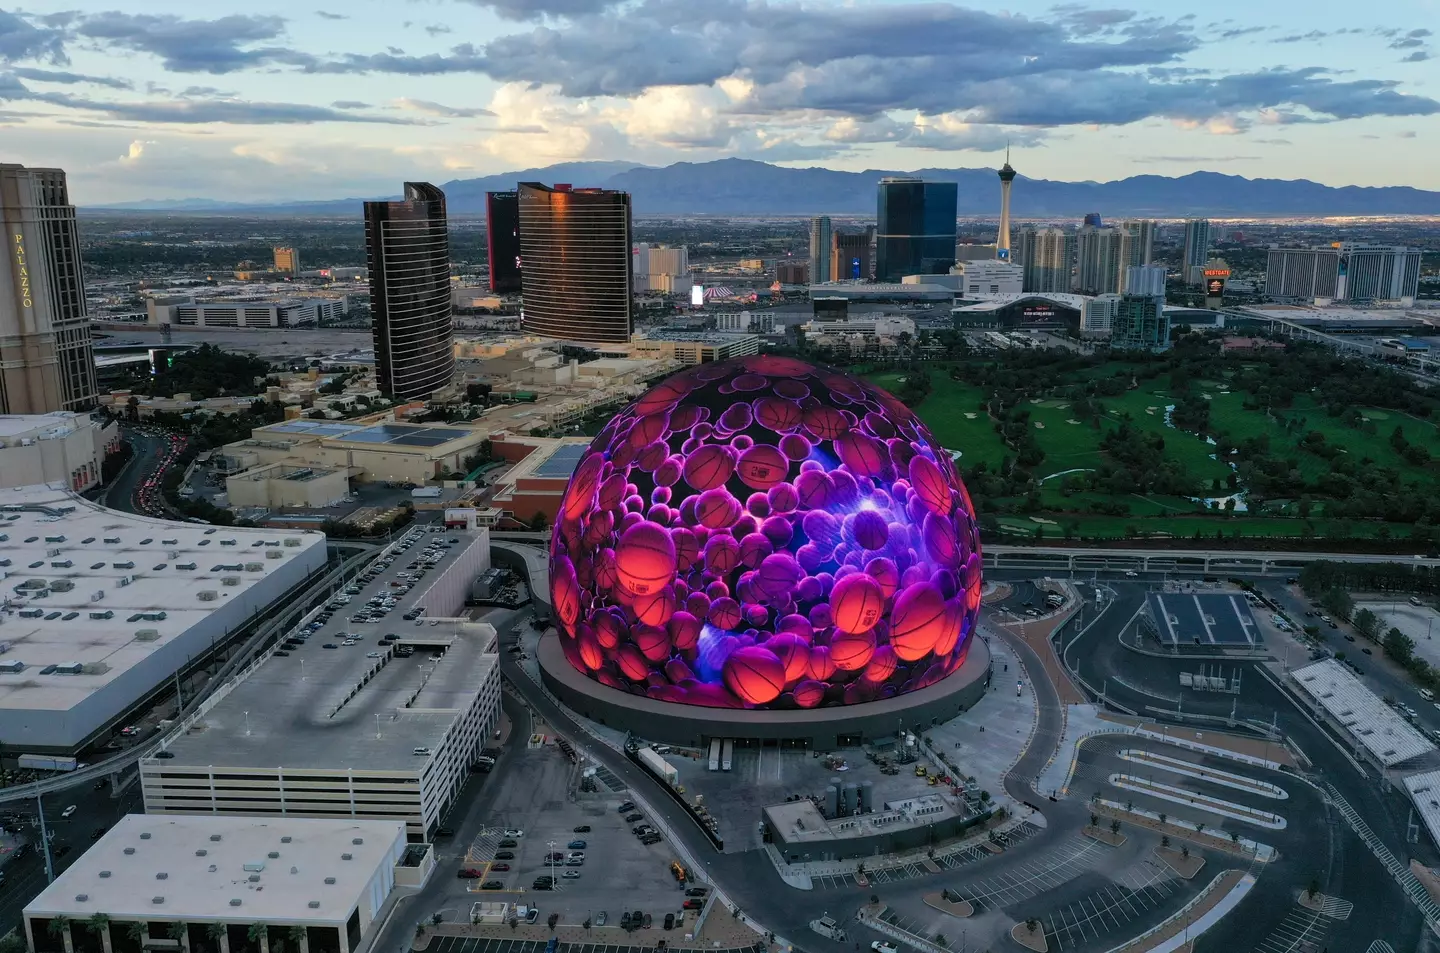 The Sphere has suffered an almost $100 million loss.